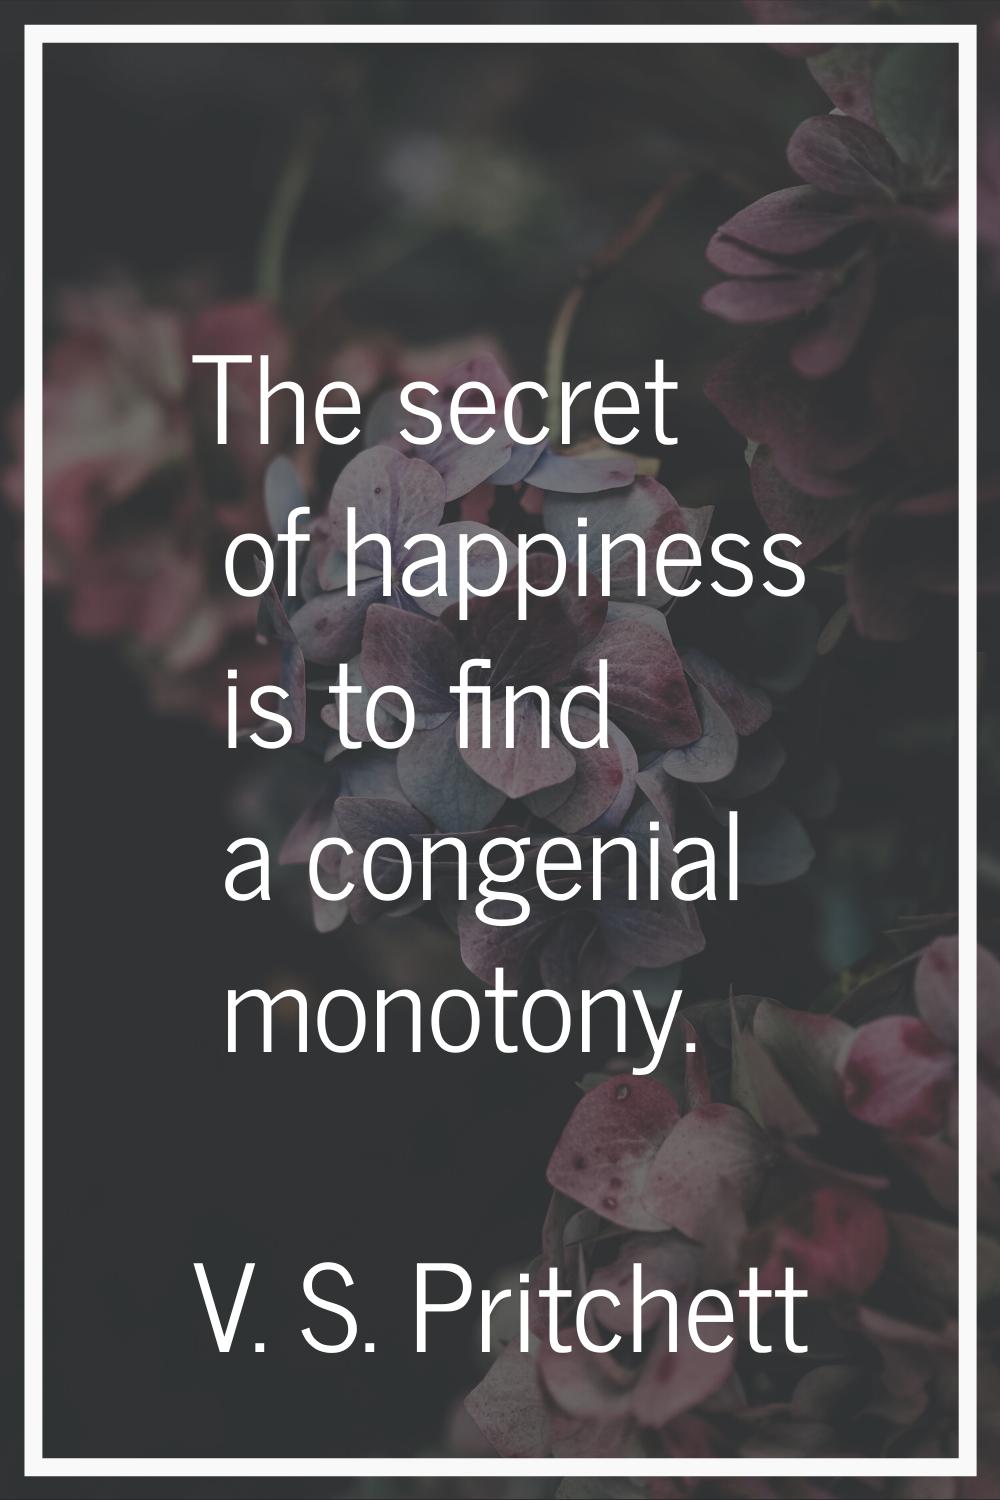 The secret of happiness is to find a congenial monotony.